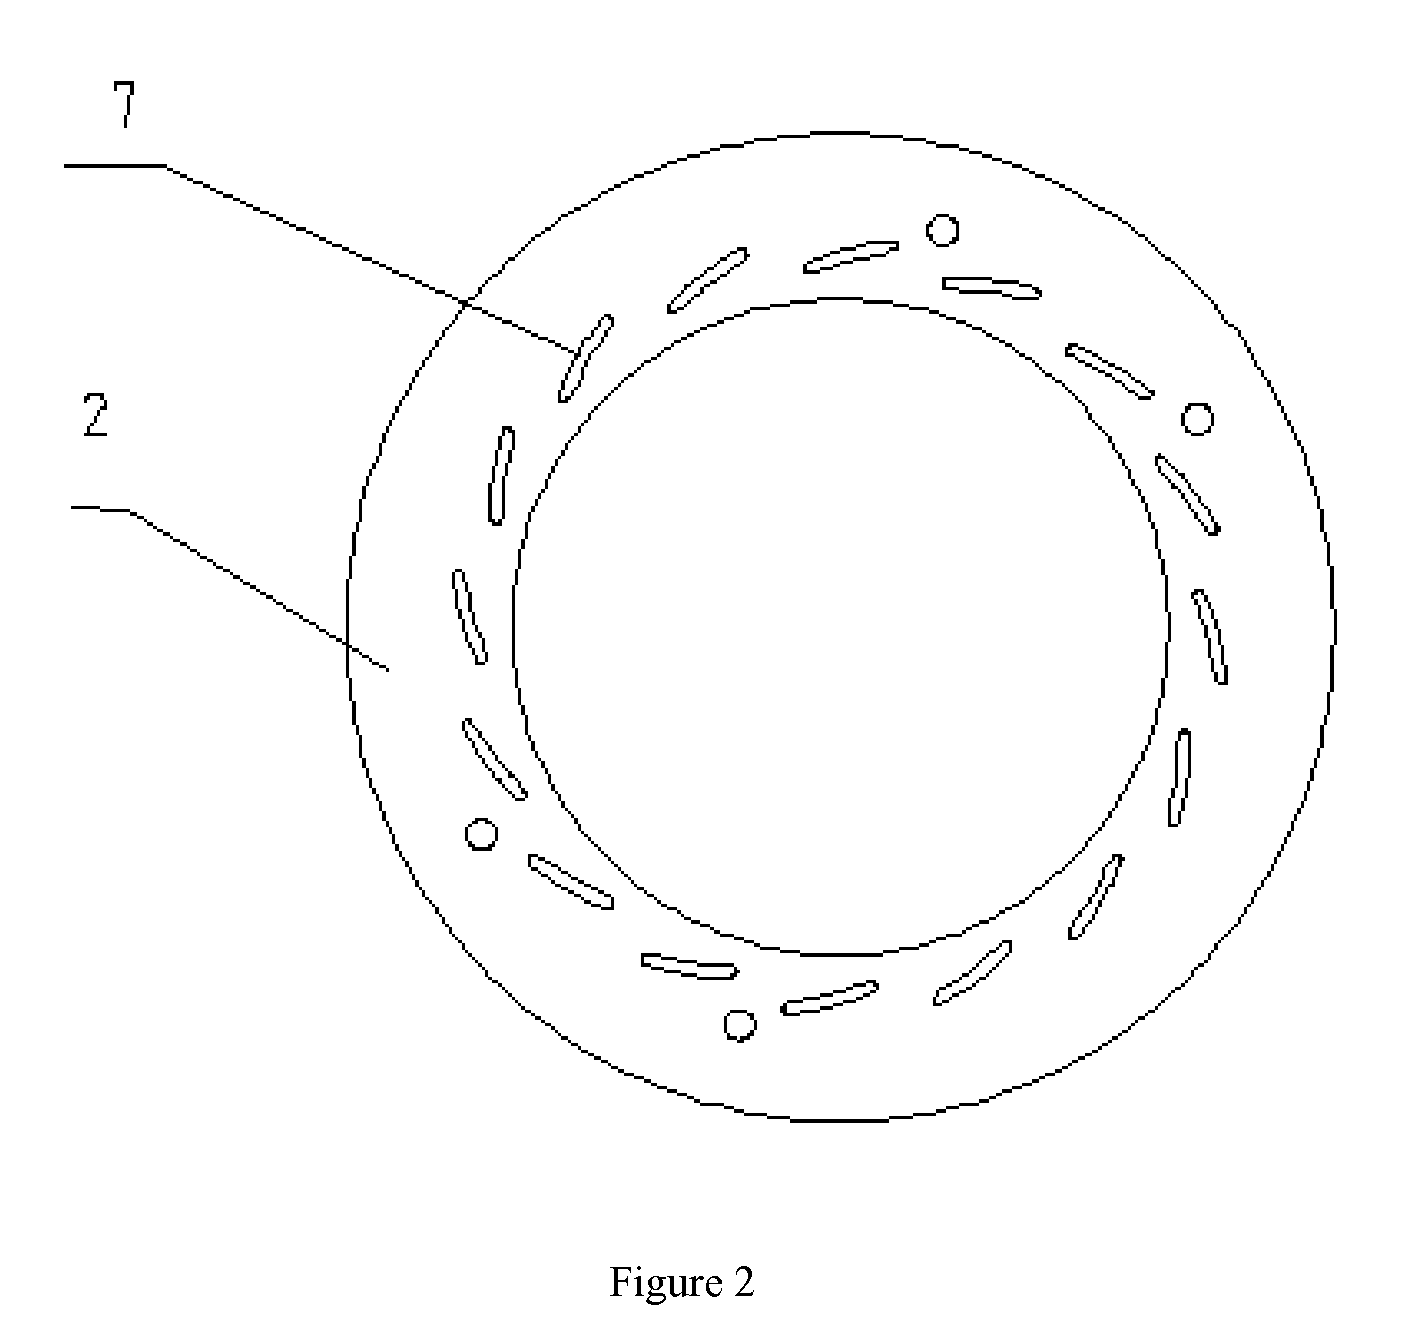 Turbocharger with a double-vane nozzle system